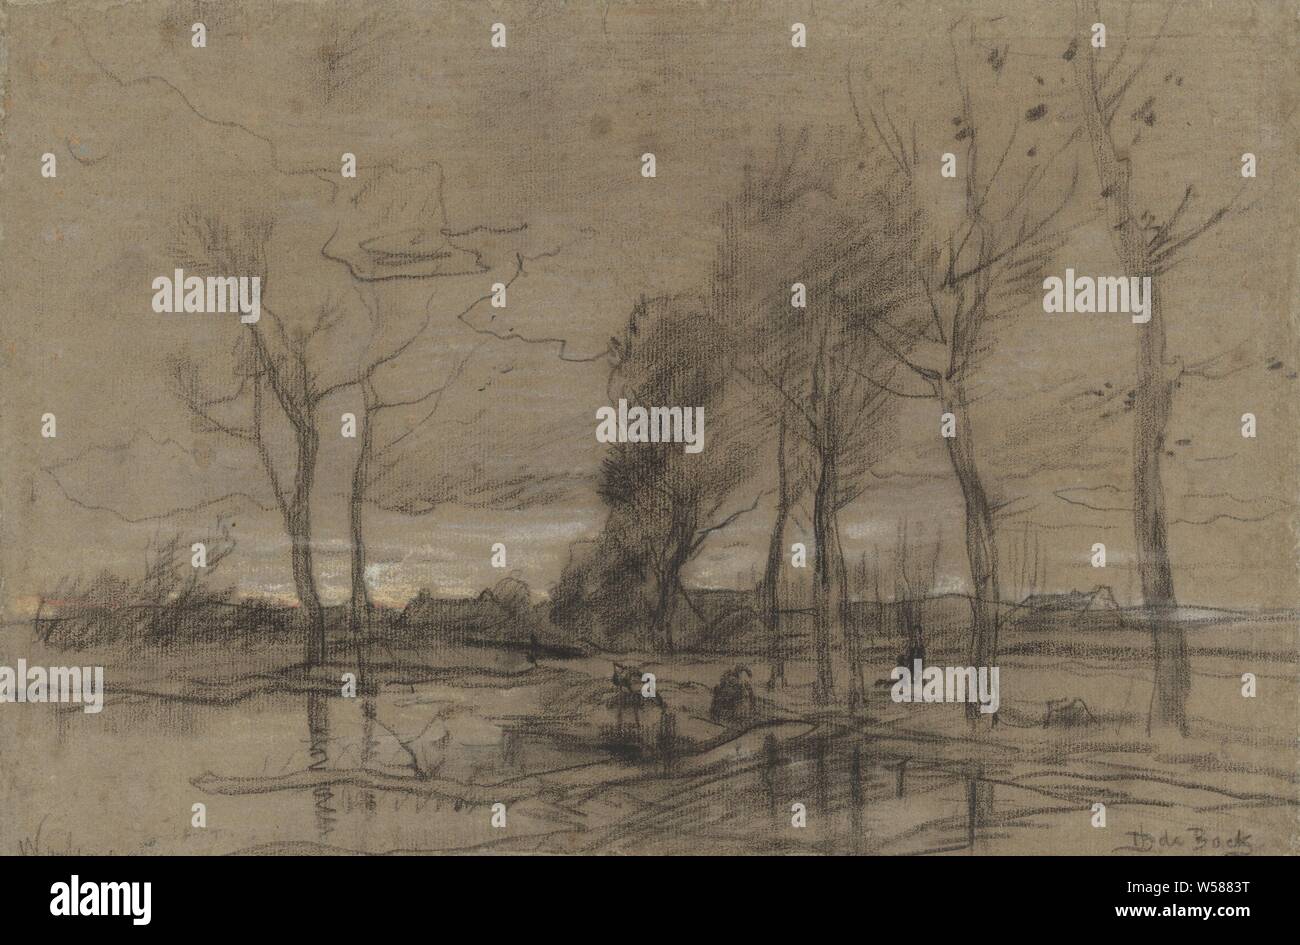 Autumn landscape, autumn landscape, landscape symbolizing autumn (the four seasons of the year), Théophile de Bock (mentioned on object), Netherlands, 1861 - 1904, paper, chalk, h 275 mm × w 410 mm Stock Photo